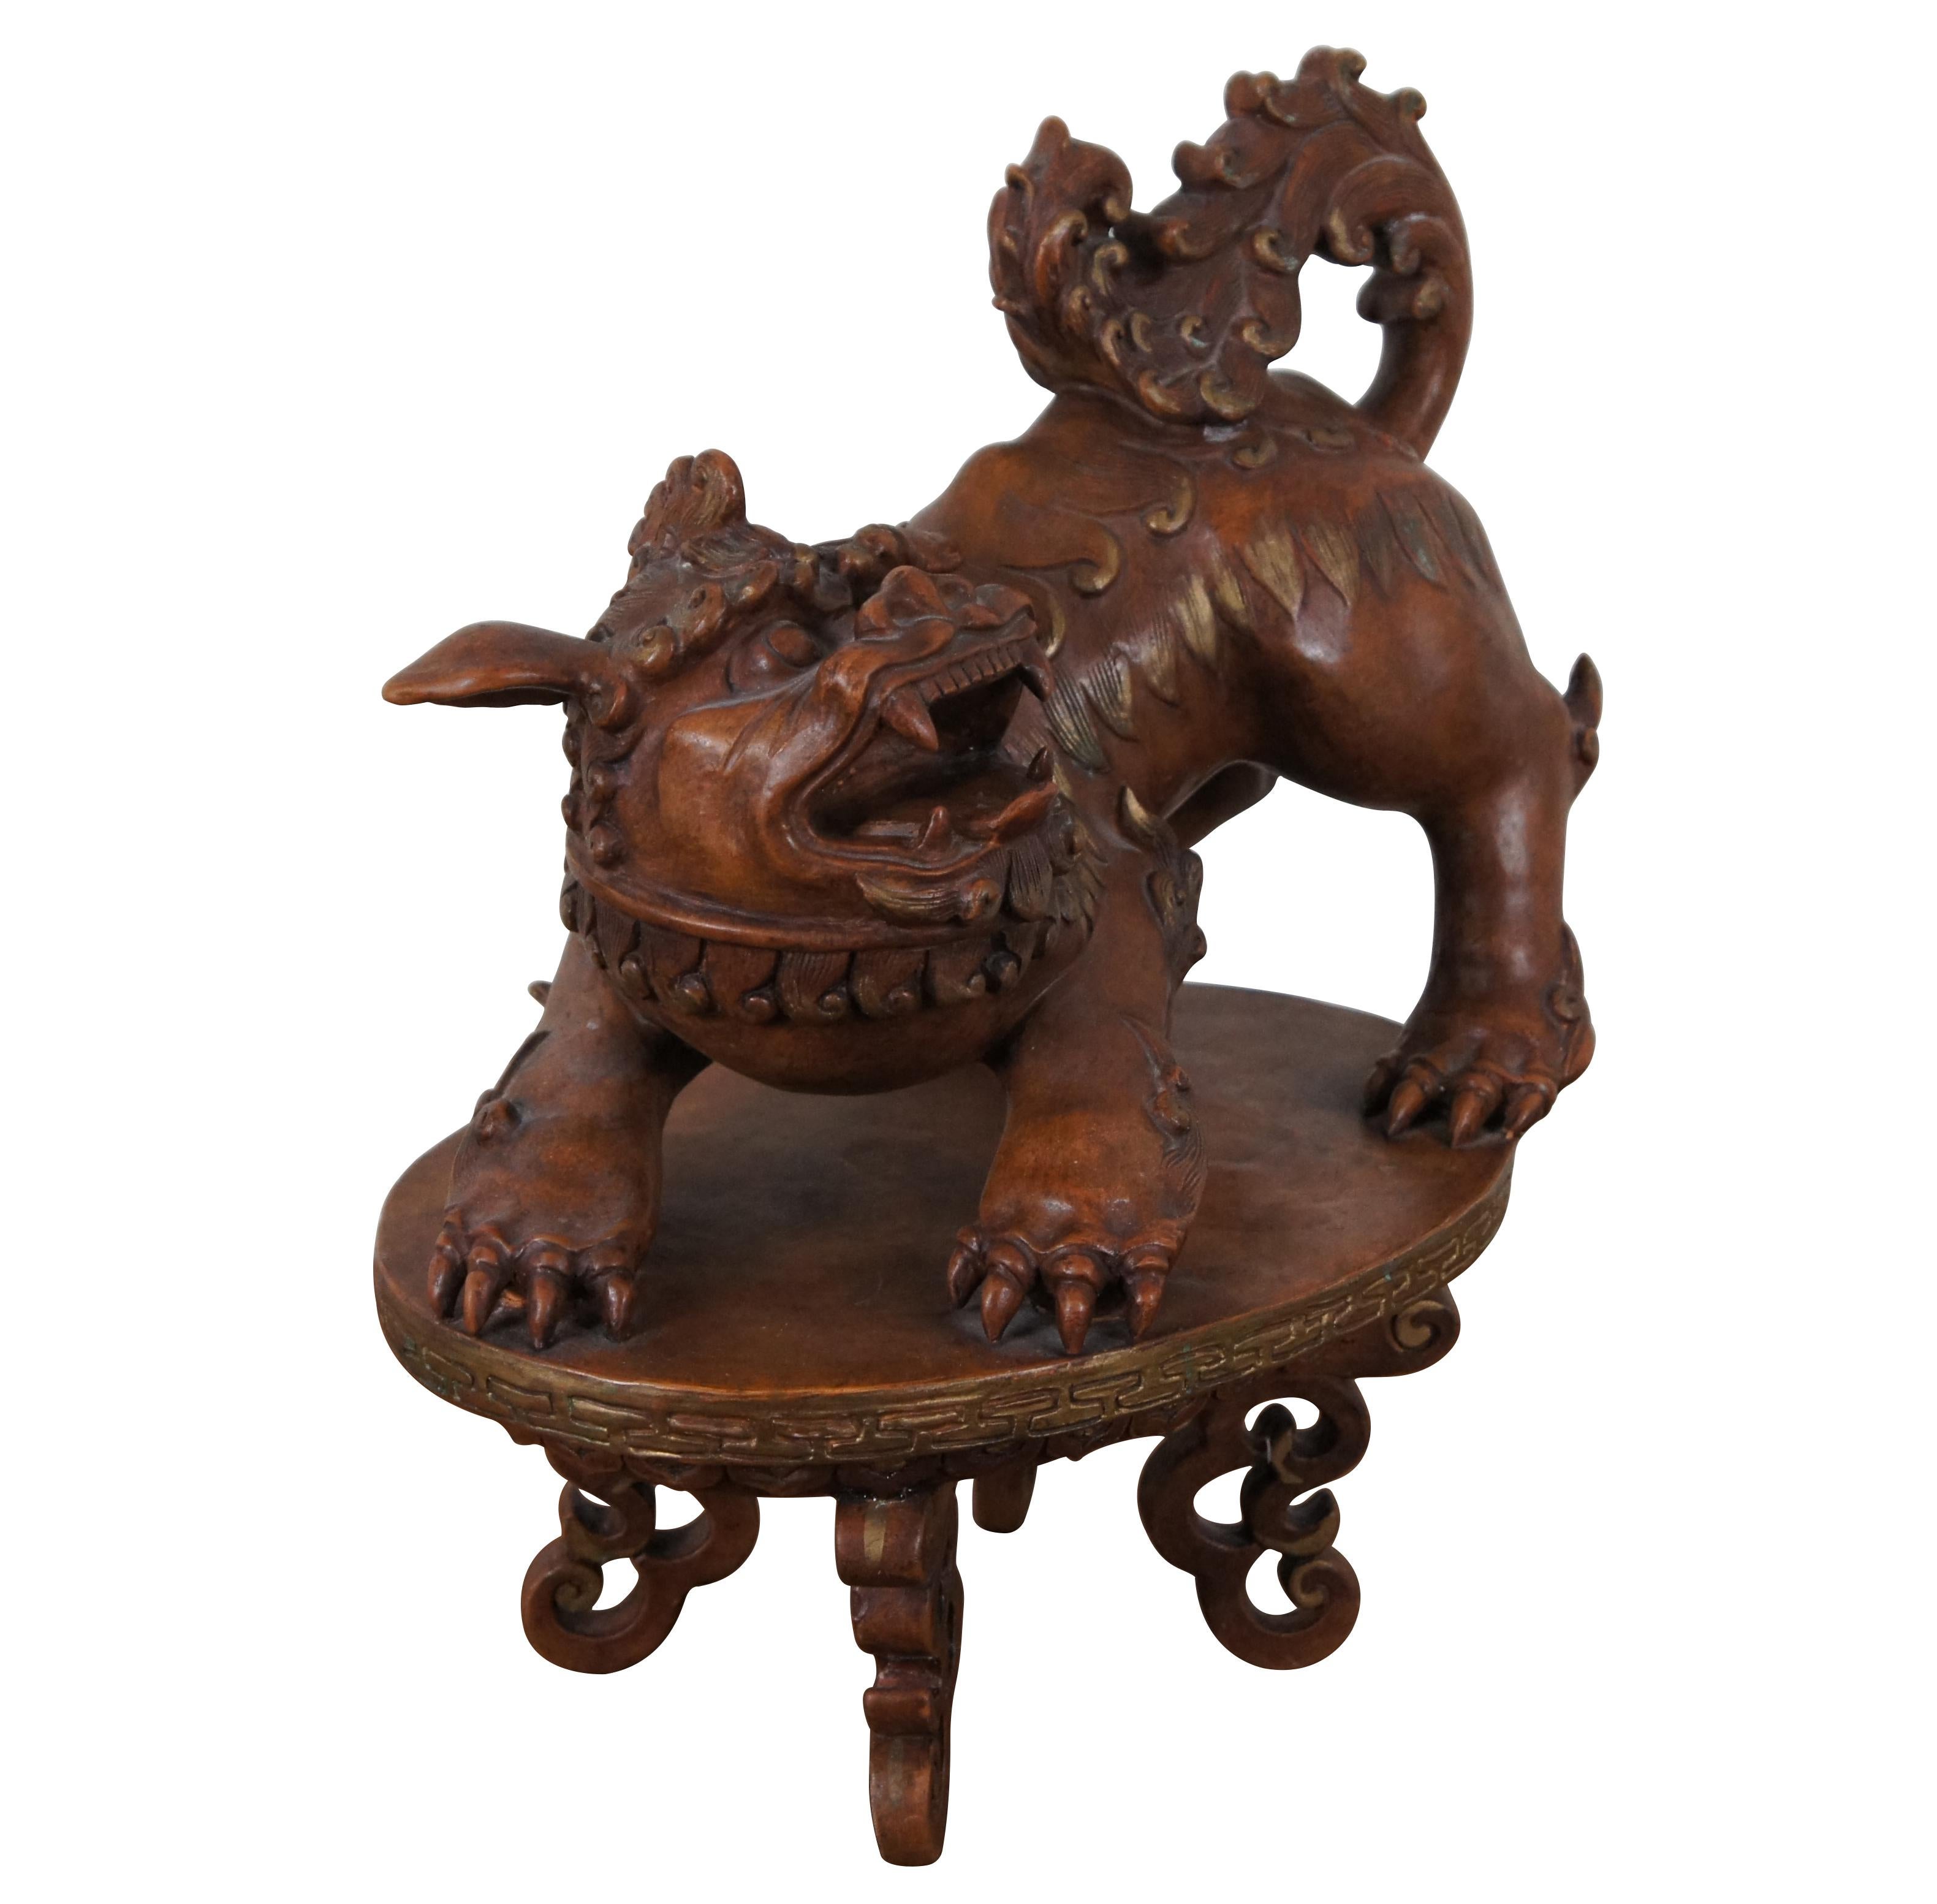 Vintage Italian chalkware painted sculpture / statue in the shape of a Chinese guardian lion / foo dog, standing on a pedestal or stool. Signed along underside.